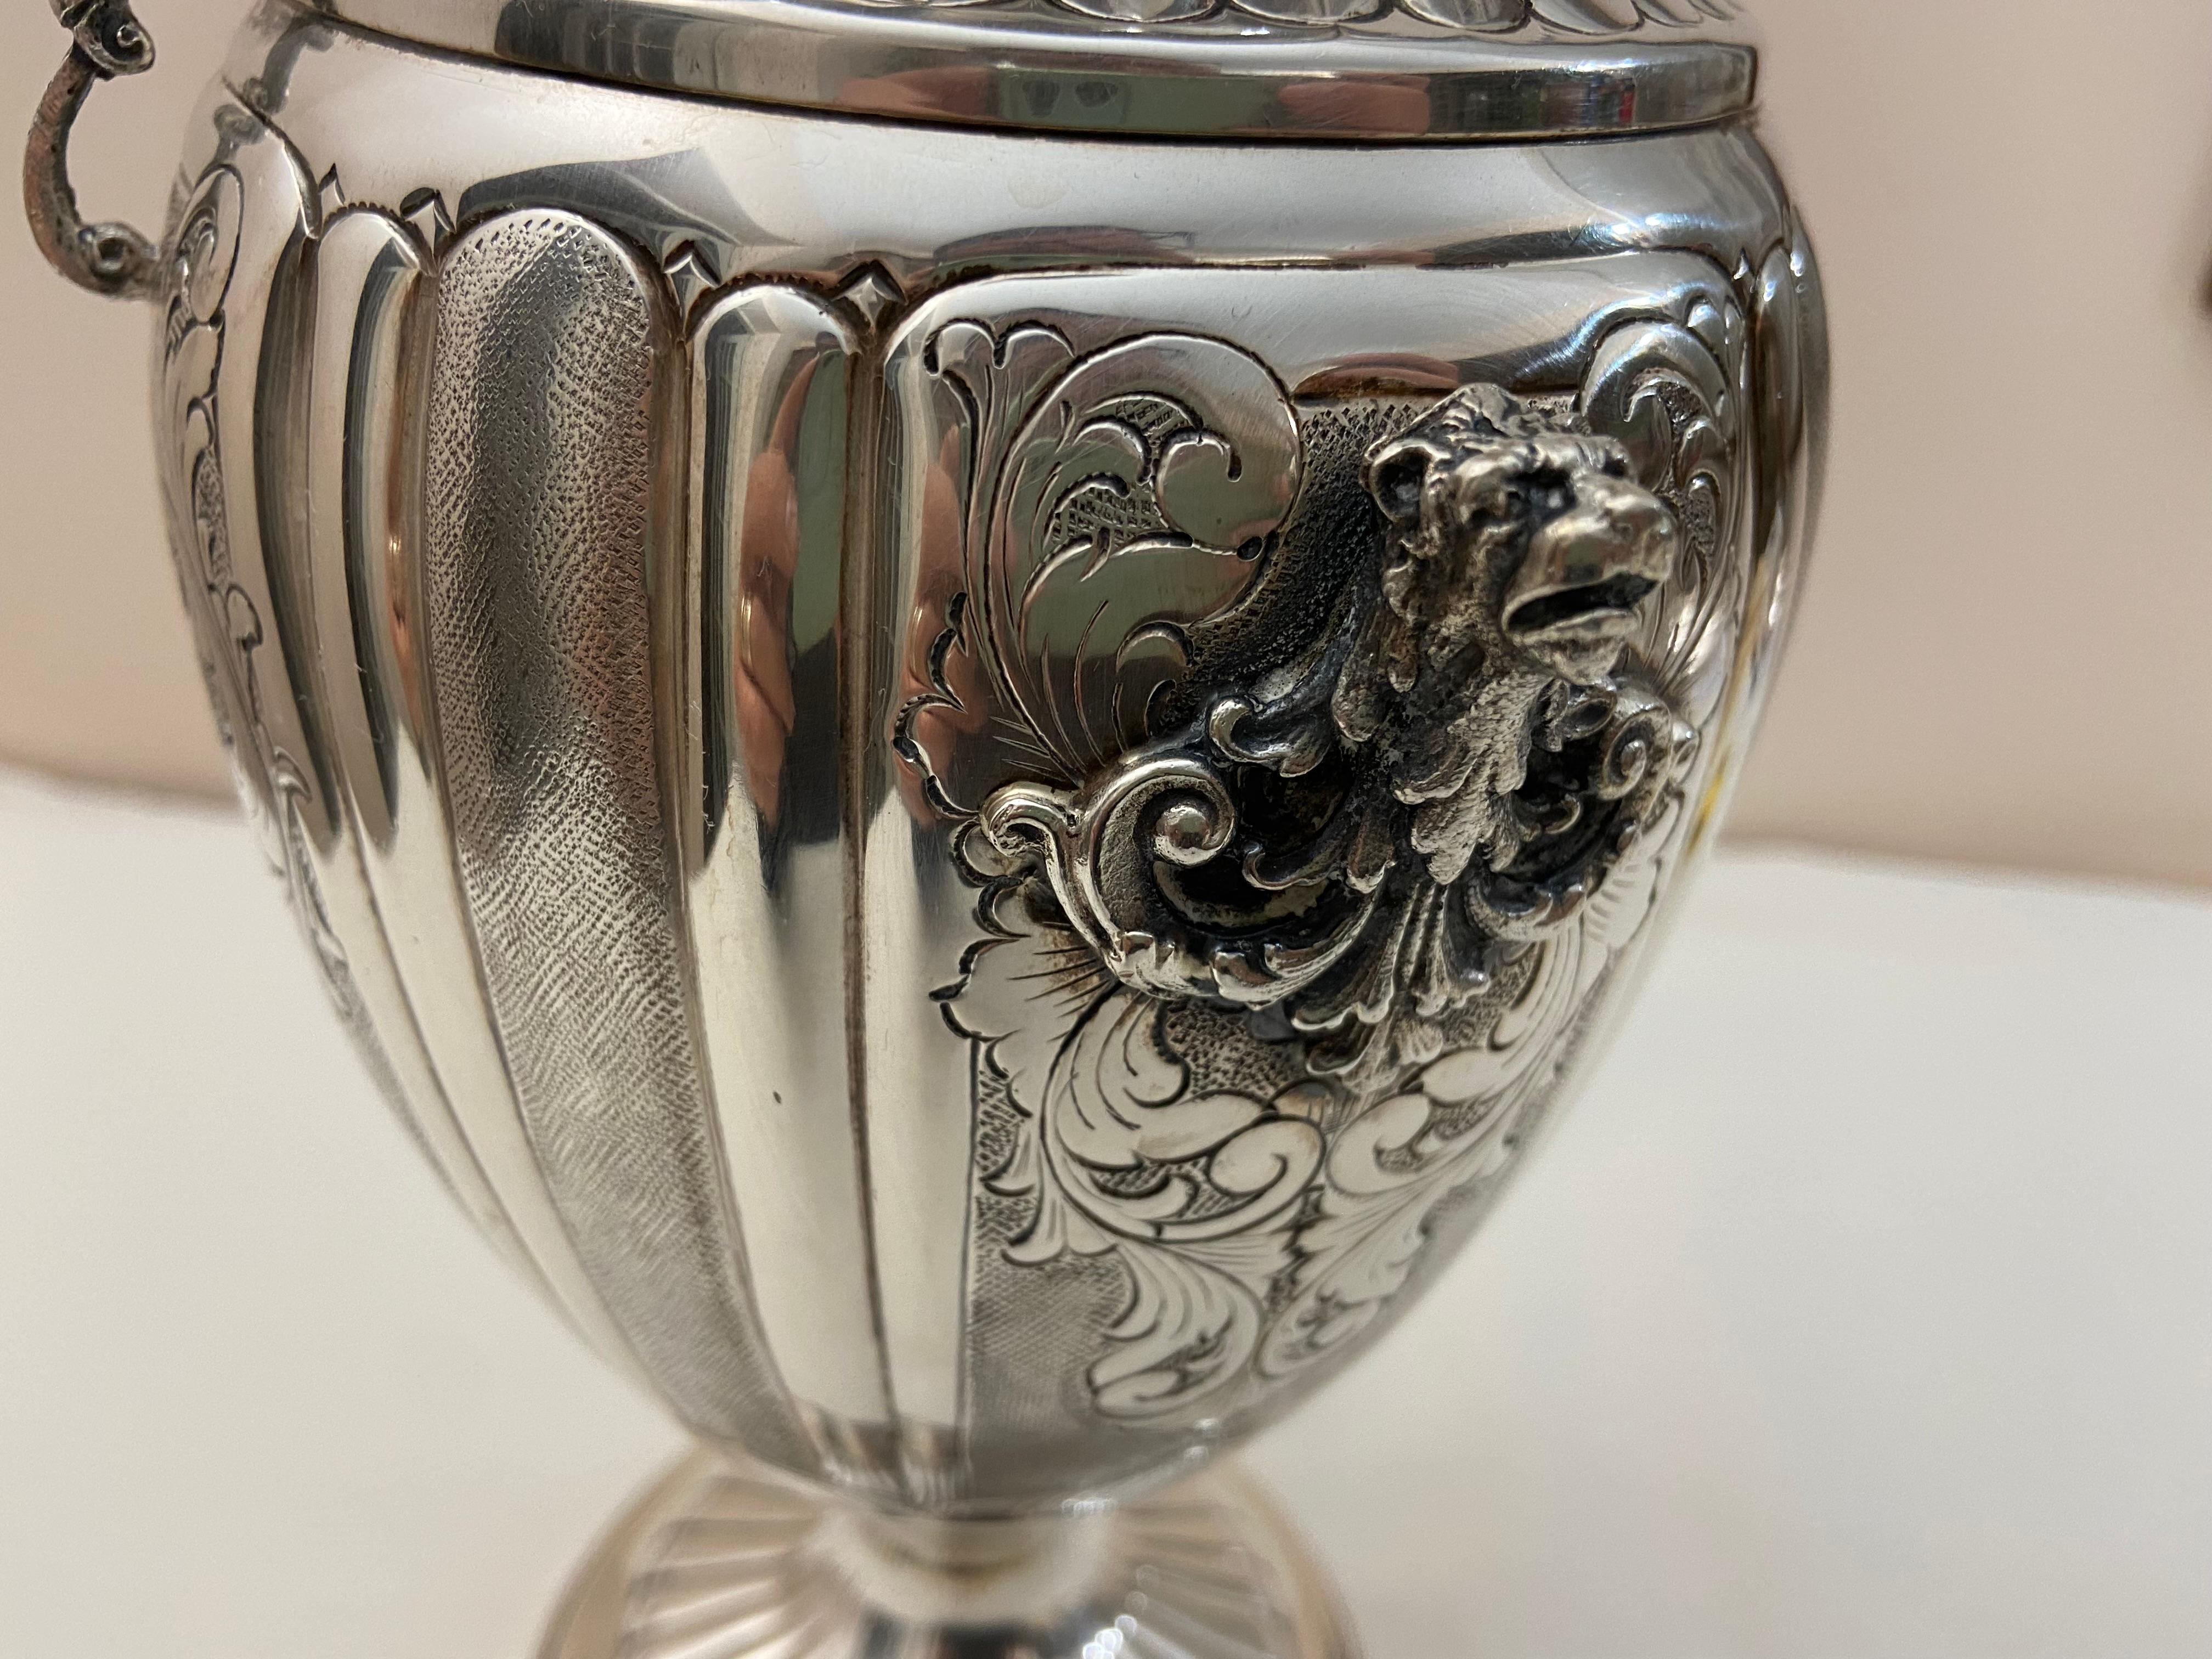 800 Silver Amphora. Measures 32 cm by 19 cm. Finely worked. It weighs 665 grams. Italian production. Shipped in an elegant gift box.